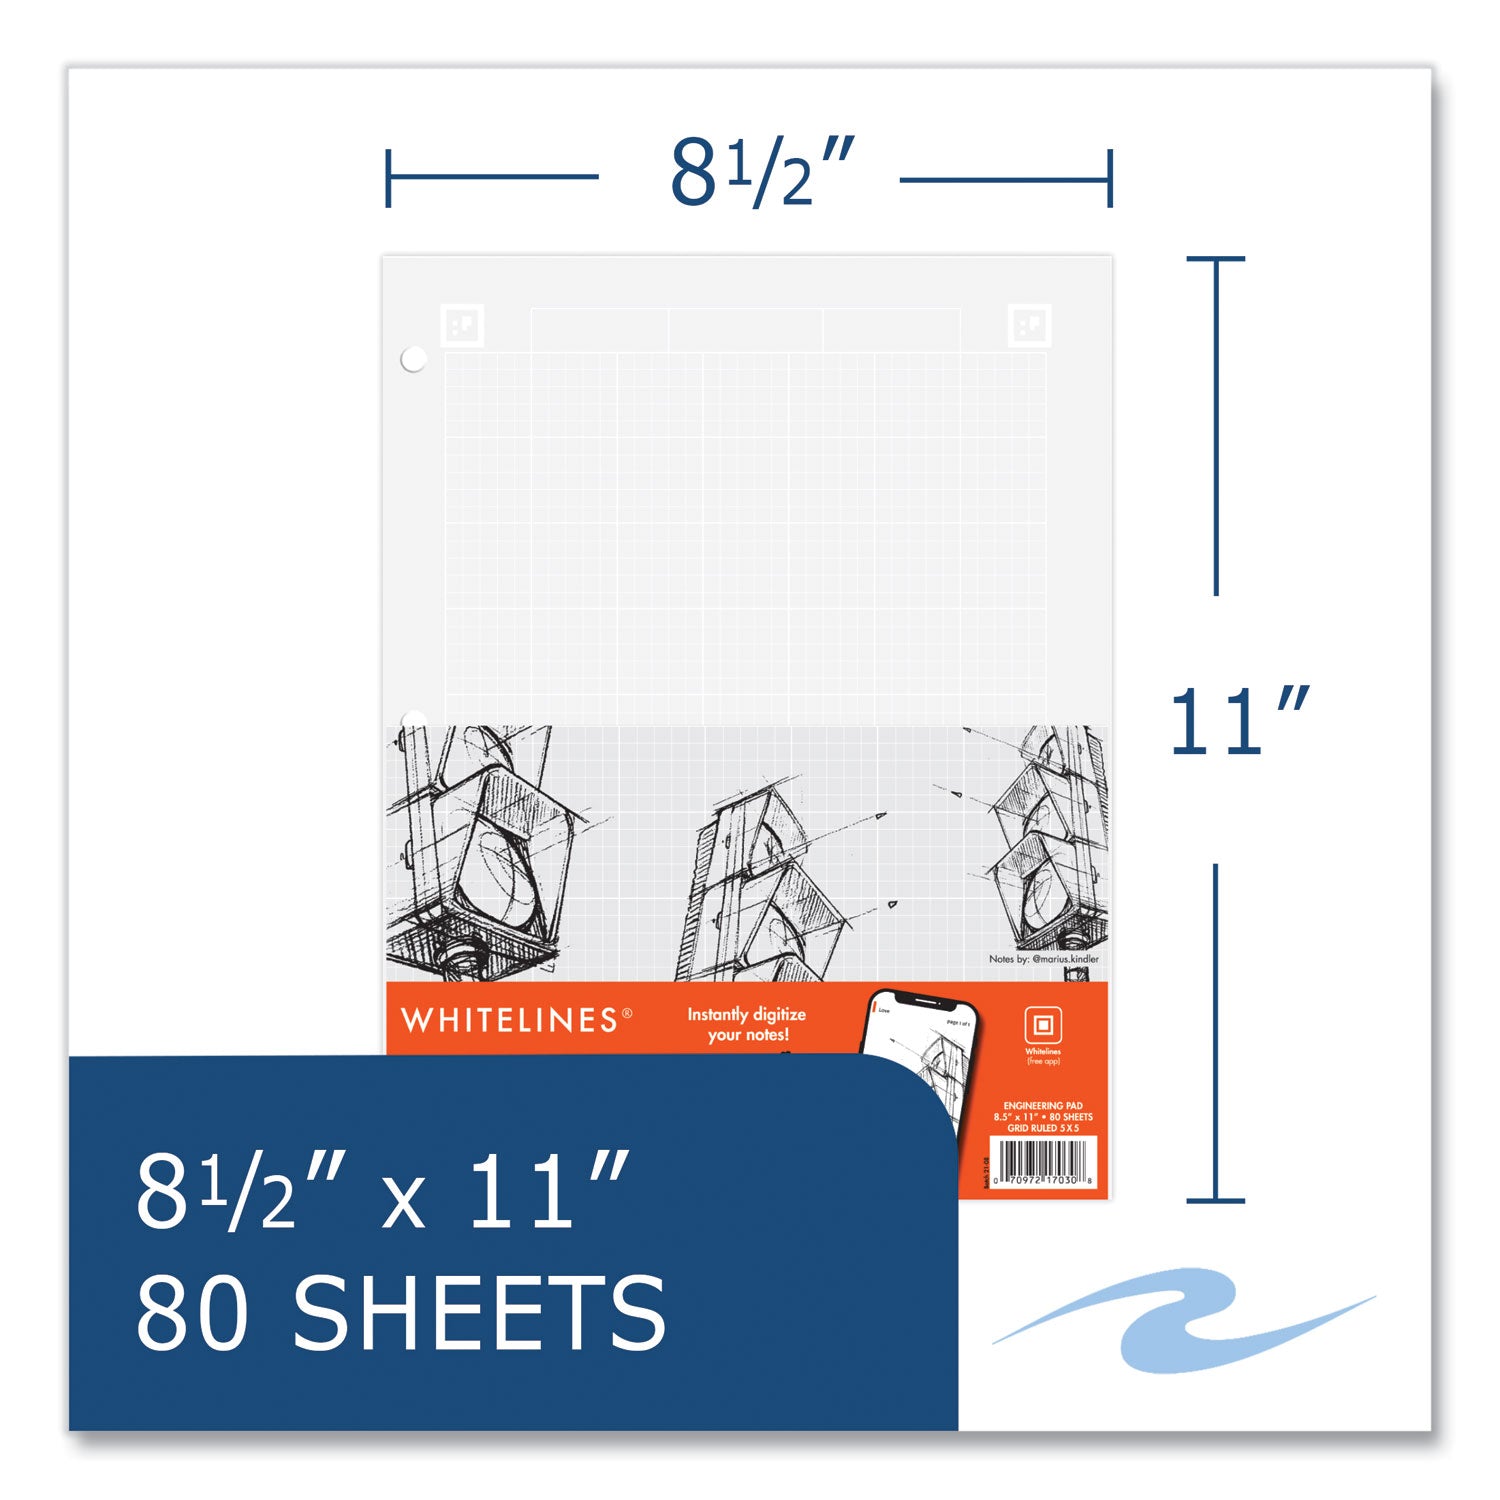 whitelines-engineering-pad-5-sq-in-quadrille-rule-80-gray-85-x-11-sheets-24-carton-ships-in-4-6-business-days_roa17030cs - 4